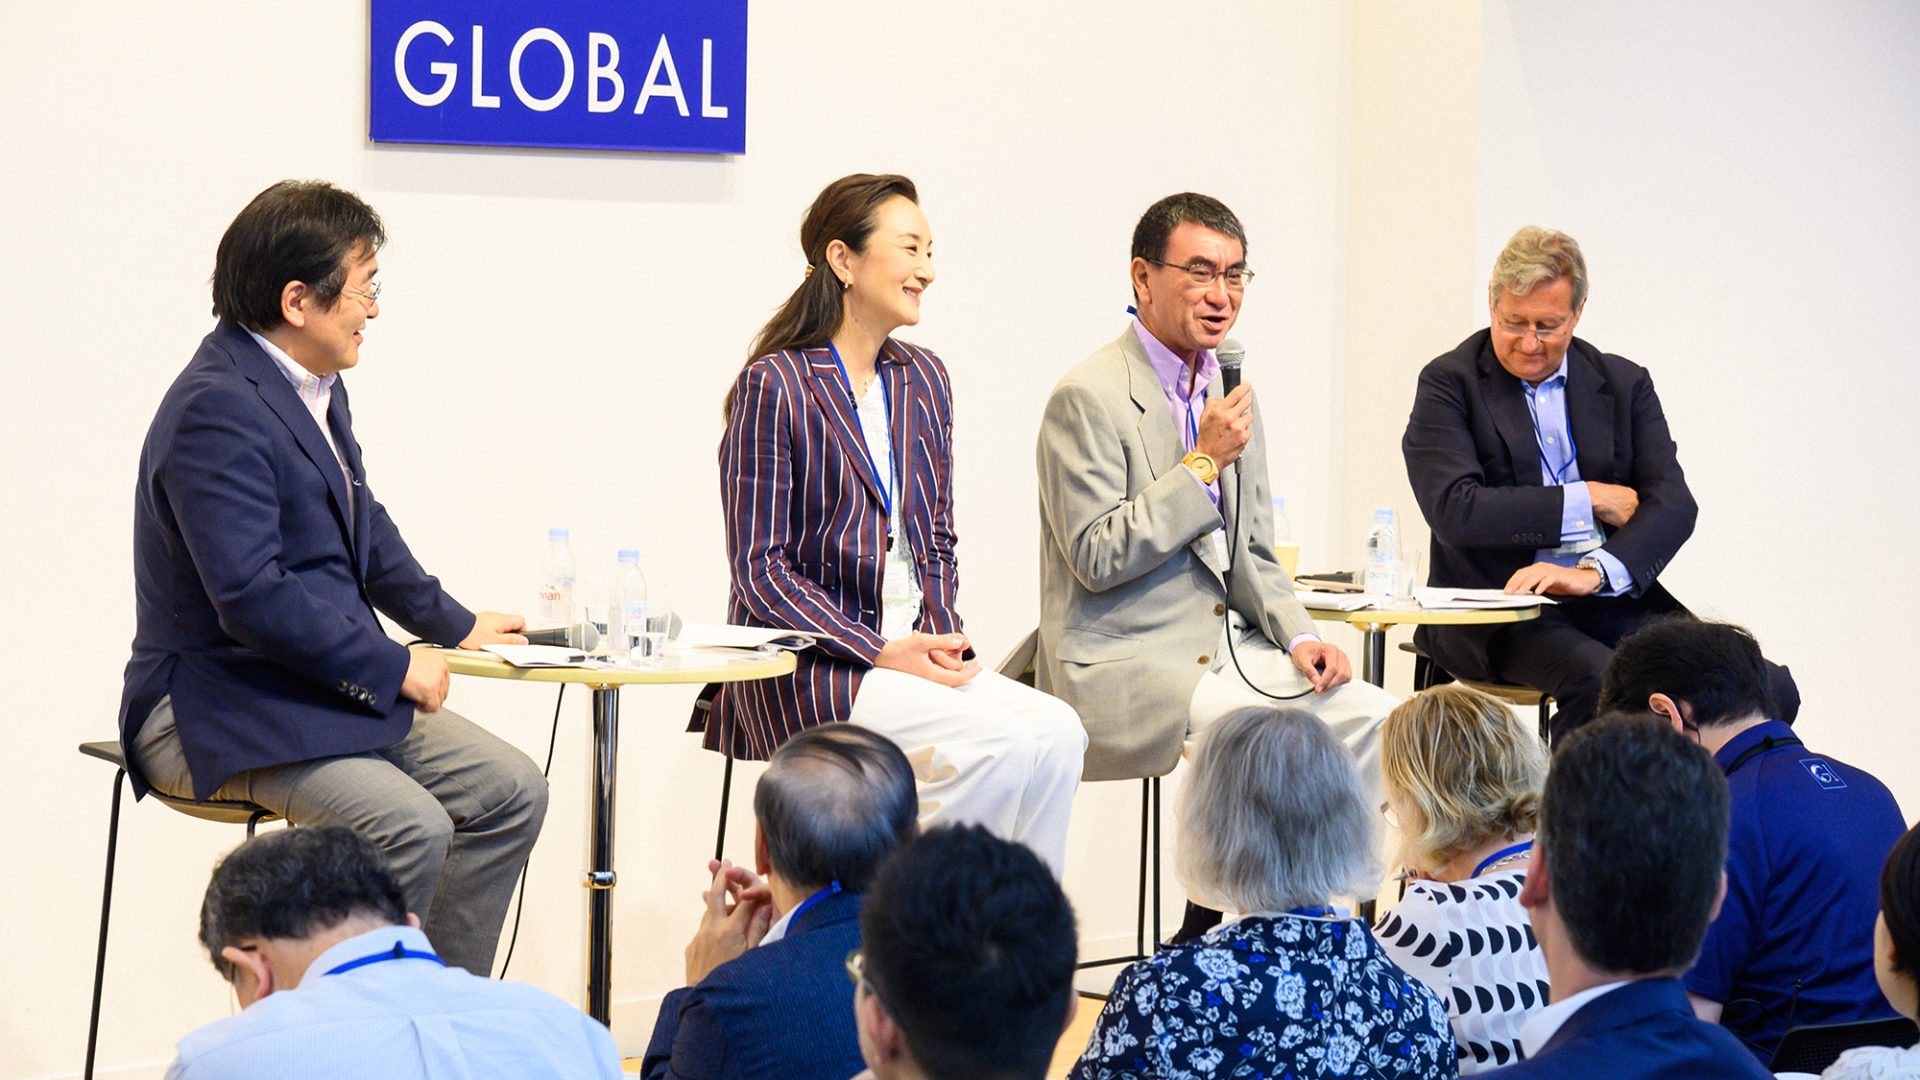 Sustainable Innovation in Times of Disruption: Japan’s Geopolitical Leadership (G1 Global 2019)